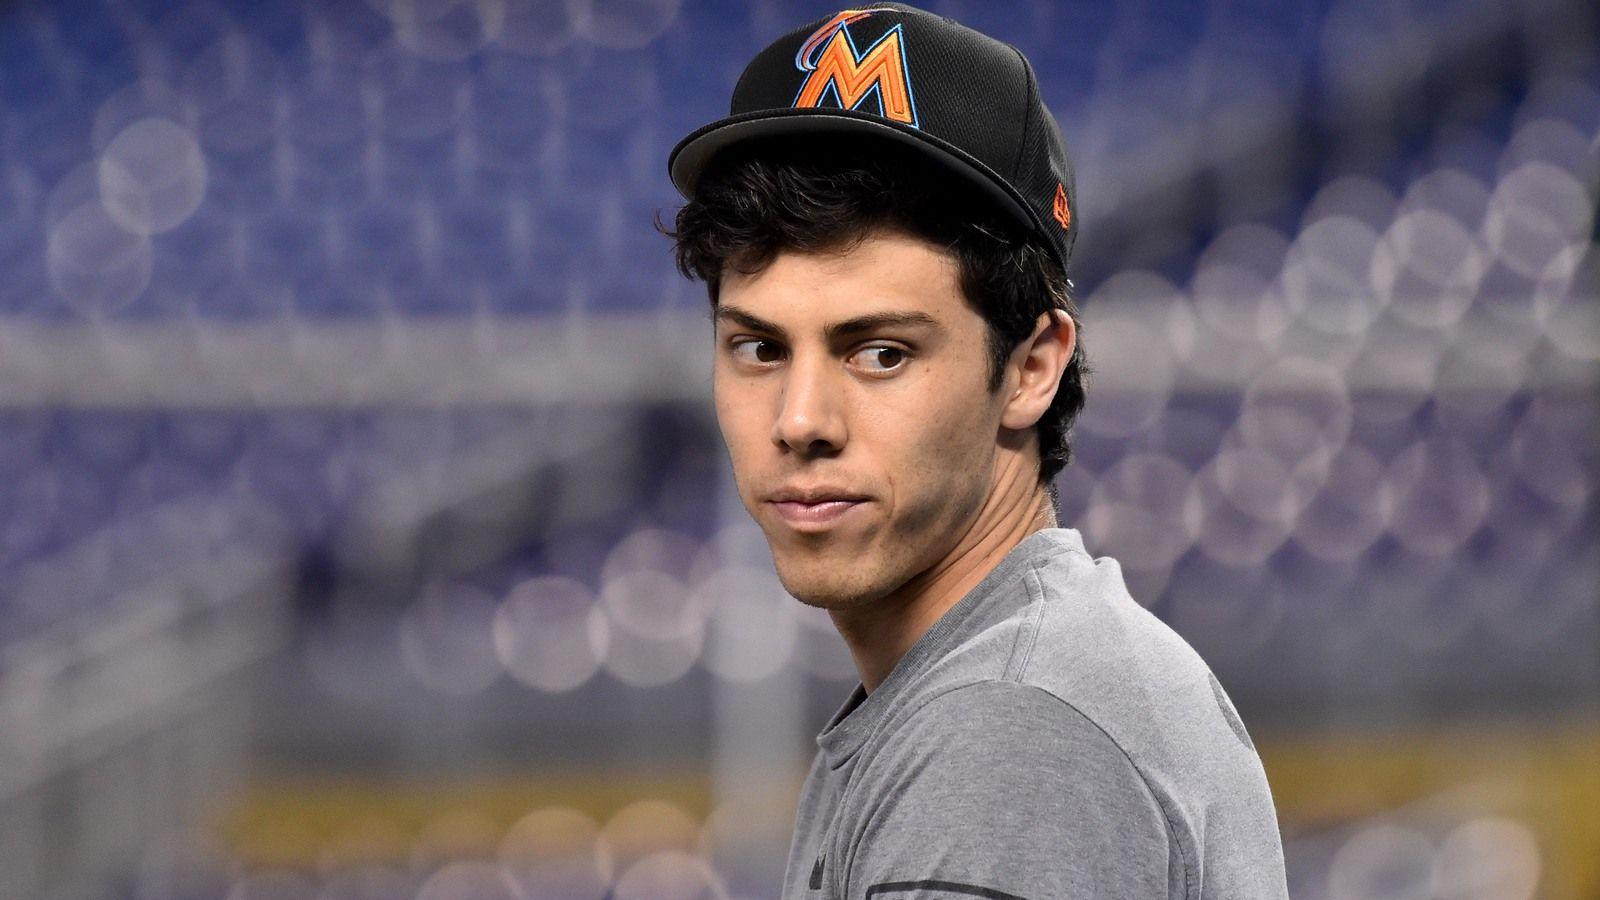 Report: Brewers made trade offer for Christian Yelich